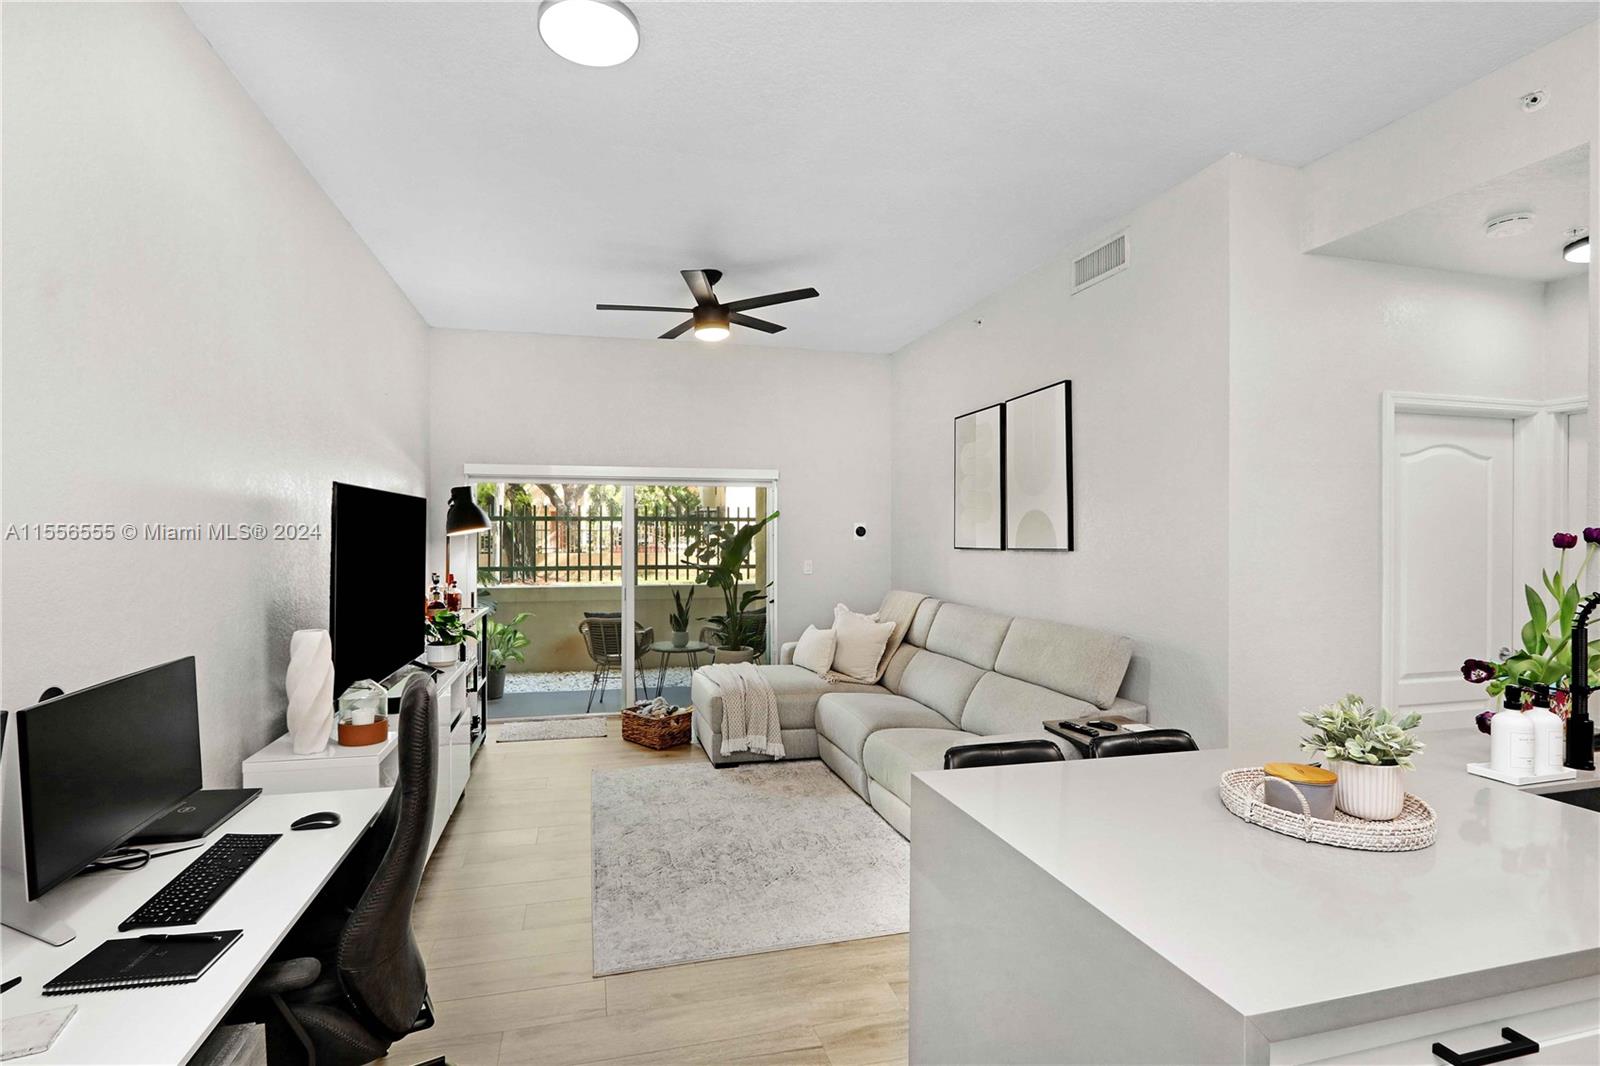 Fully remodeled first floor condo in the heart of South Miami! Walking distance to Sunset Place, metro rail, Baptist Hospital and all the amazing restaurants this area has to offer. This move-in ready condo features new tile floors, high ceilings, renovated kitchen with waterfall quartz countertops, stainless steel kitchen appliances (fridge, stove, microwave and dishwasher). Bathroom was also remodeled featuring rainfall shower head and beautiful mosaic tile. Includes blackout curtains for windows and sliding glass doors. A/C  and washer / dryer are inside of unit and were installed in 2022. The building includes beautiful amenities including: gym, pool, clubhouse, covered garage, 24/7 staff and security, and more!!!